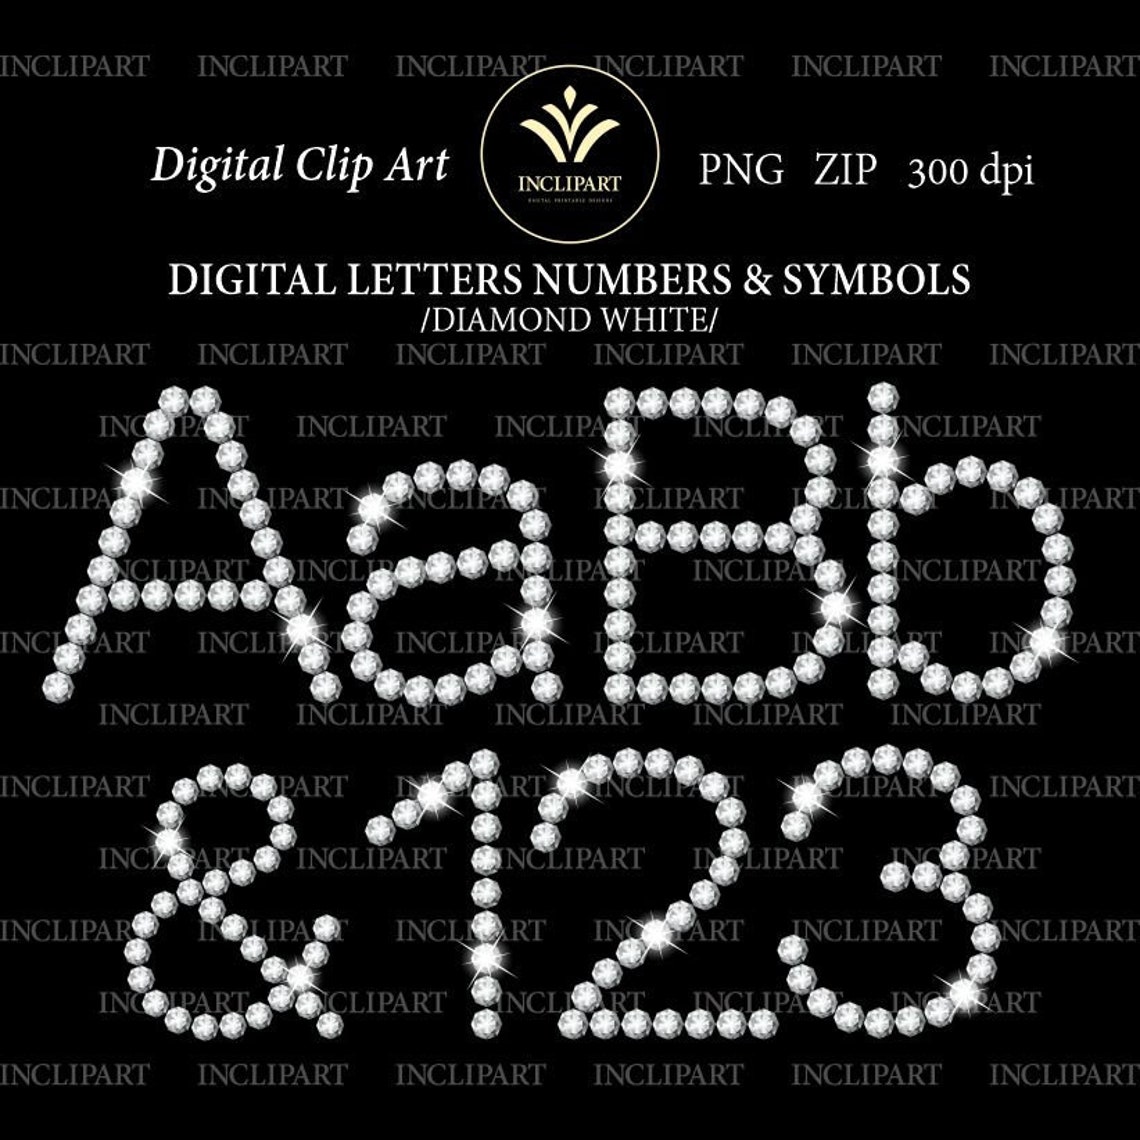 Thin Diamond letters numbers clipart PNG. Digital download. | Etsy